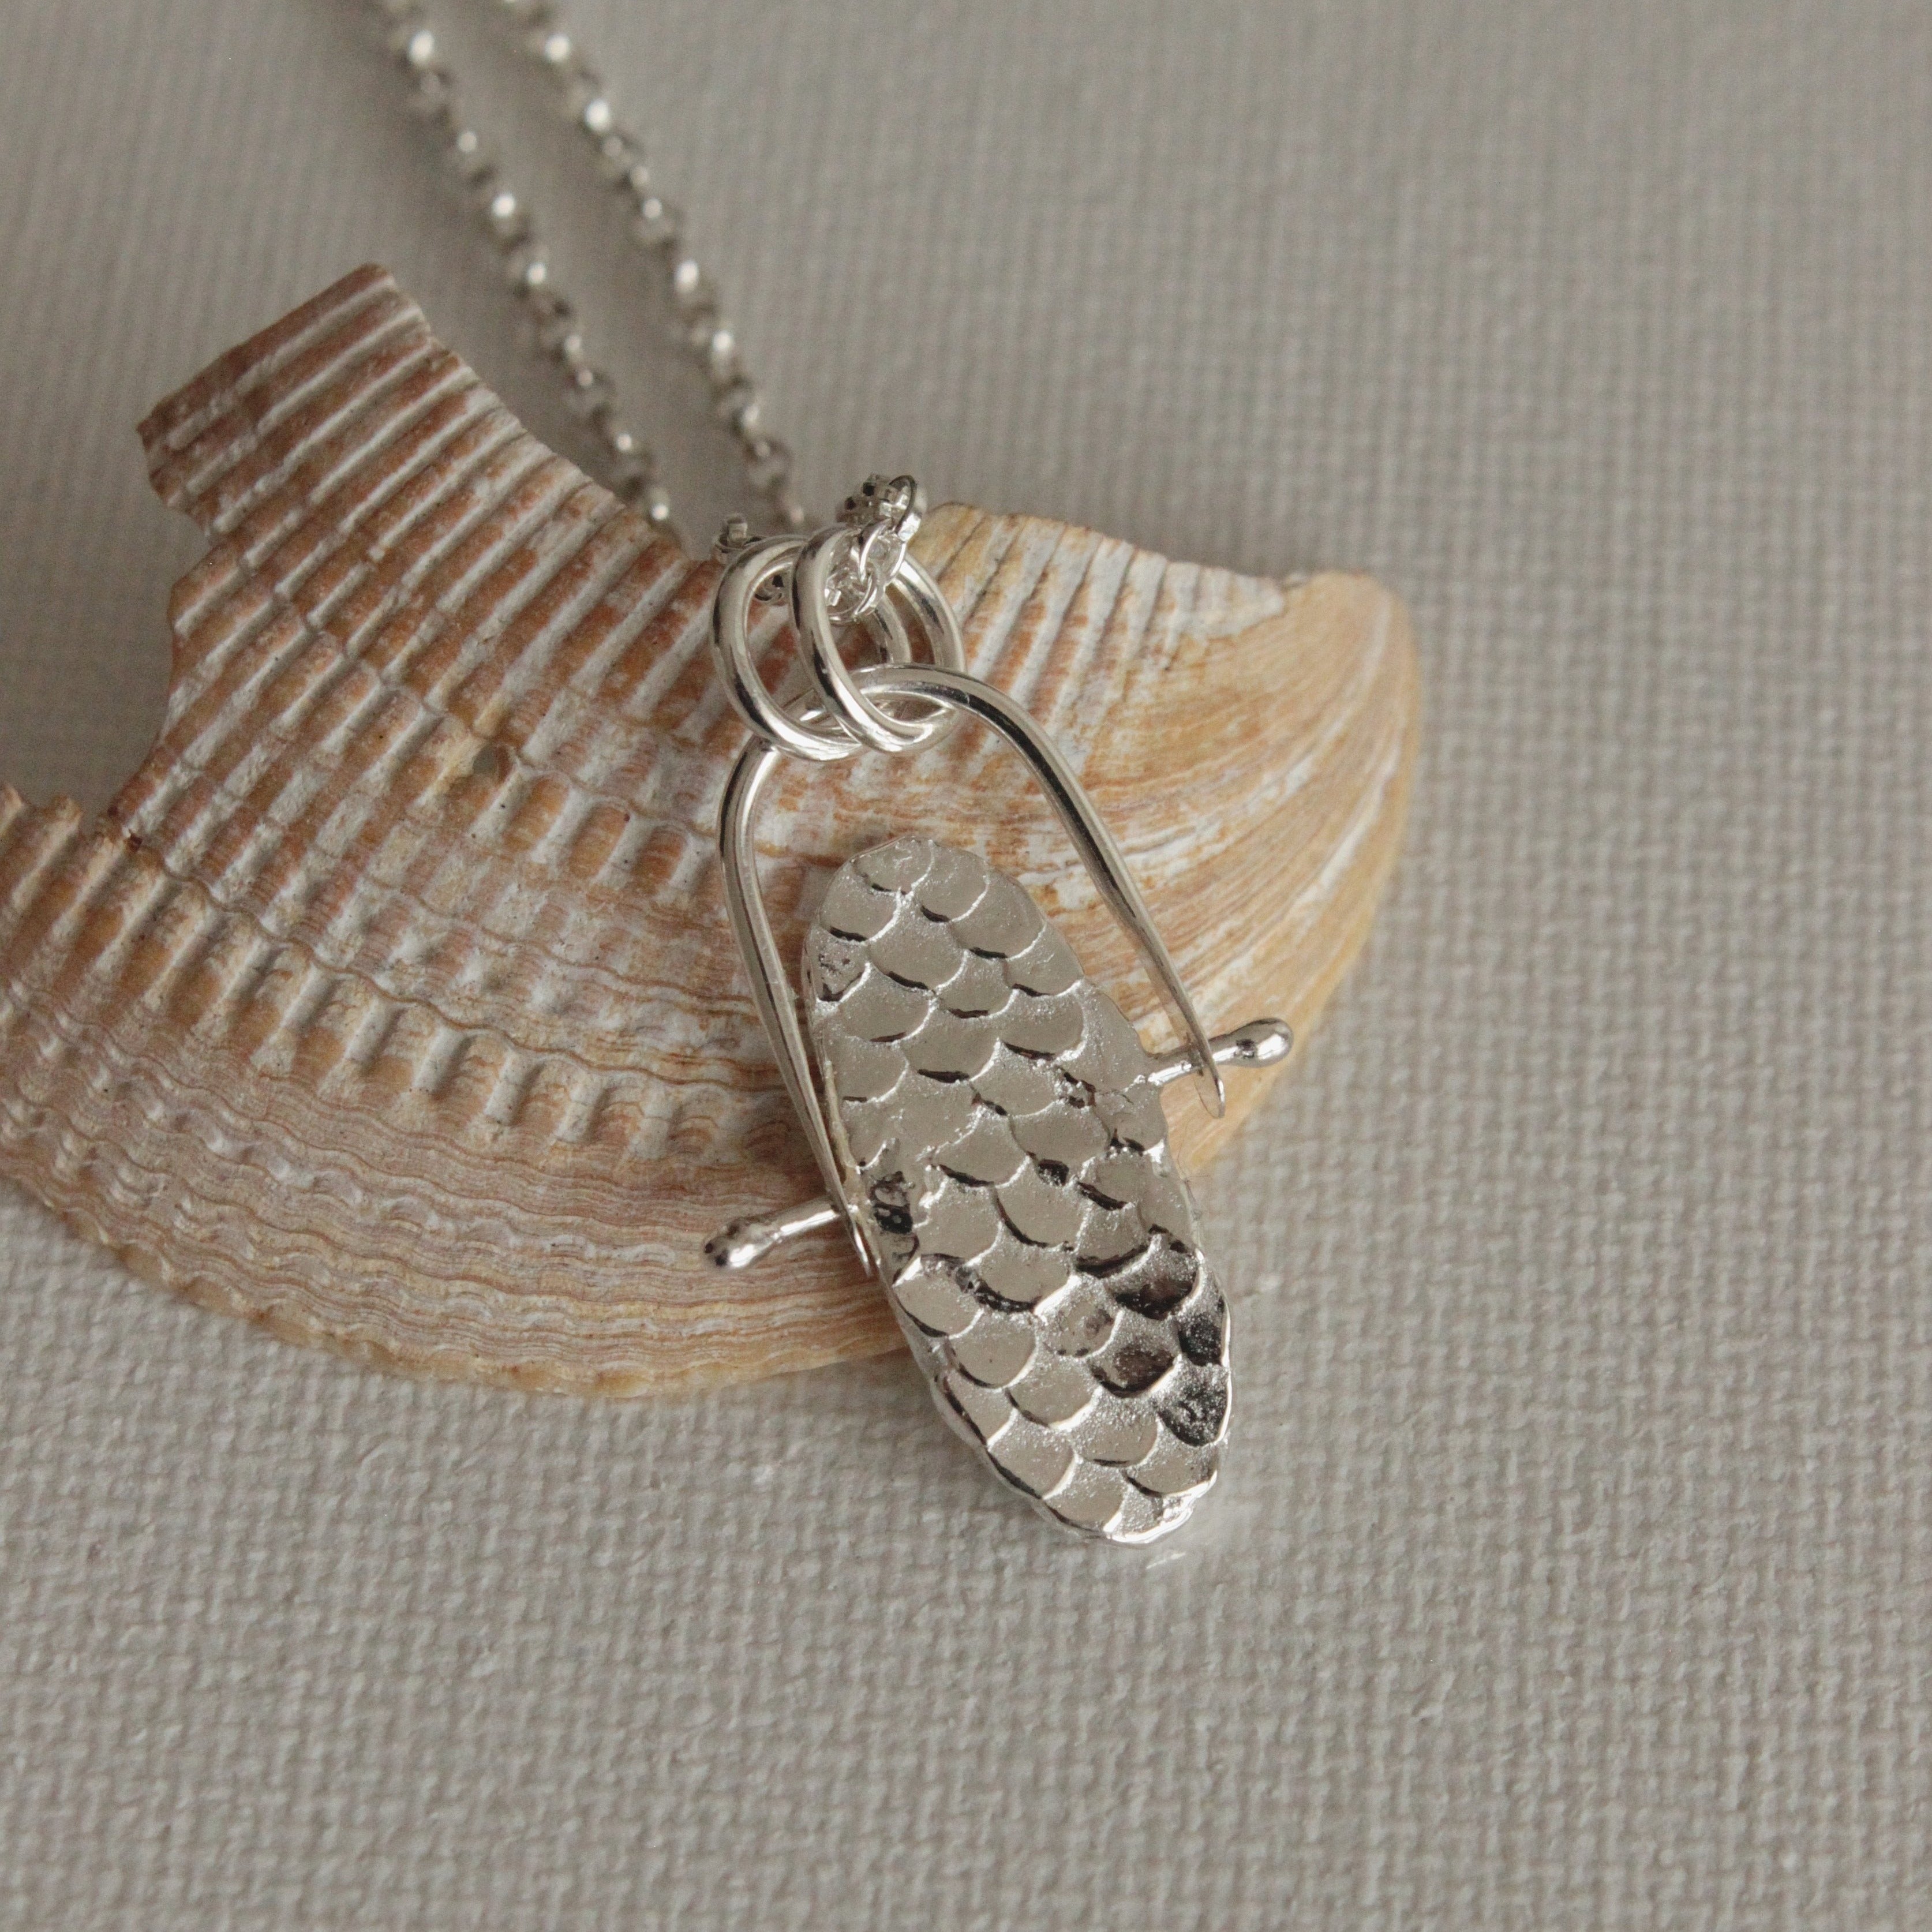 The Infinity pendant is everything you’ll ever need in a necklace. It features the signature Siren scales, organic textures and playfully tactile movement-making it the perfect antidote for anxiety and stress. Roll the pendant around in your fingers through times of stress and enjoy the calming benefits it brings.